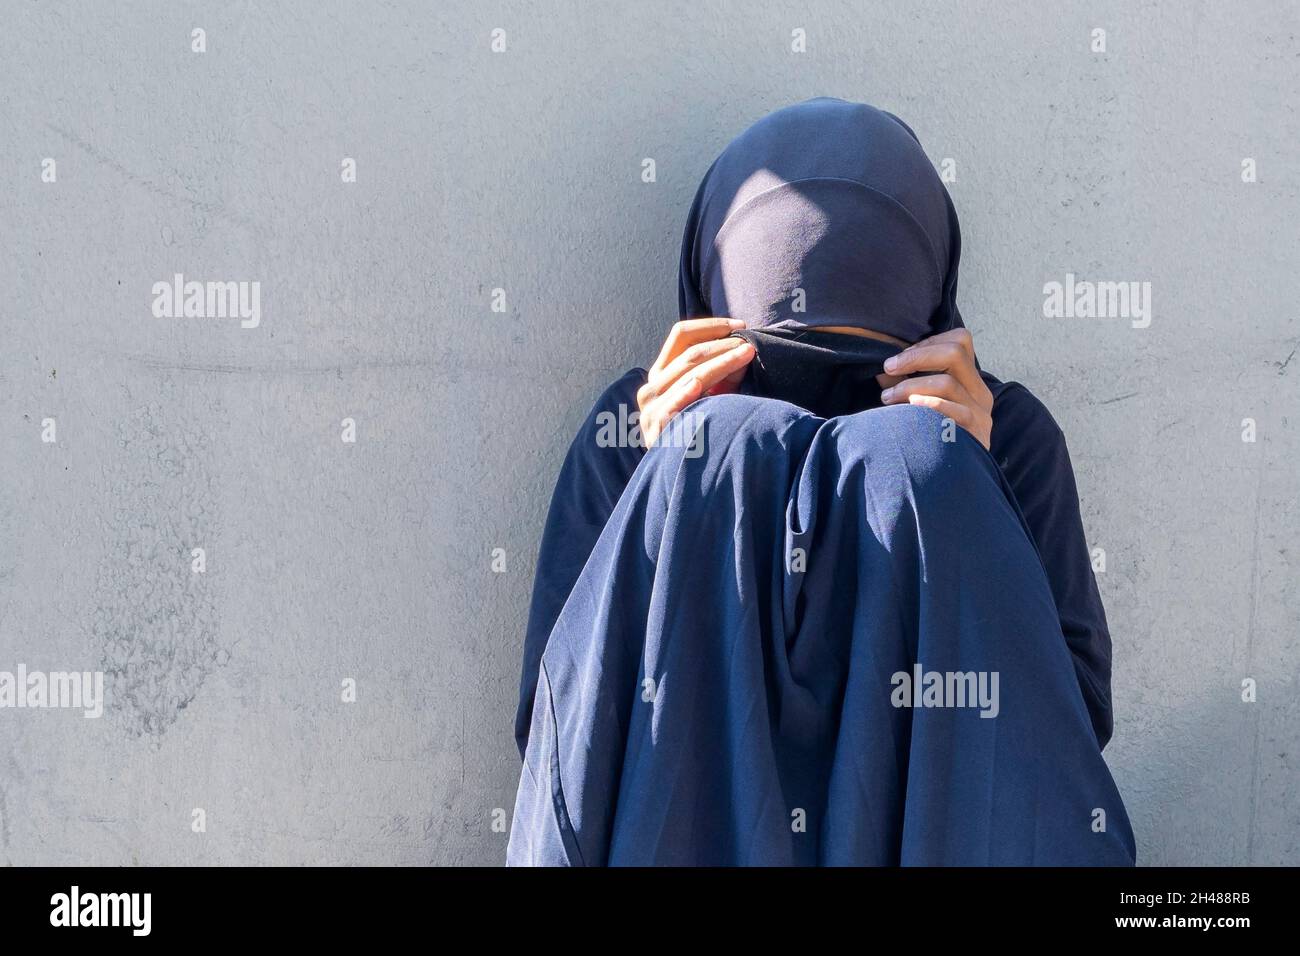 Muslim girl, woman sitting in a street of the city. Muslim poor woman with closed face begging for alms. Stock Photo